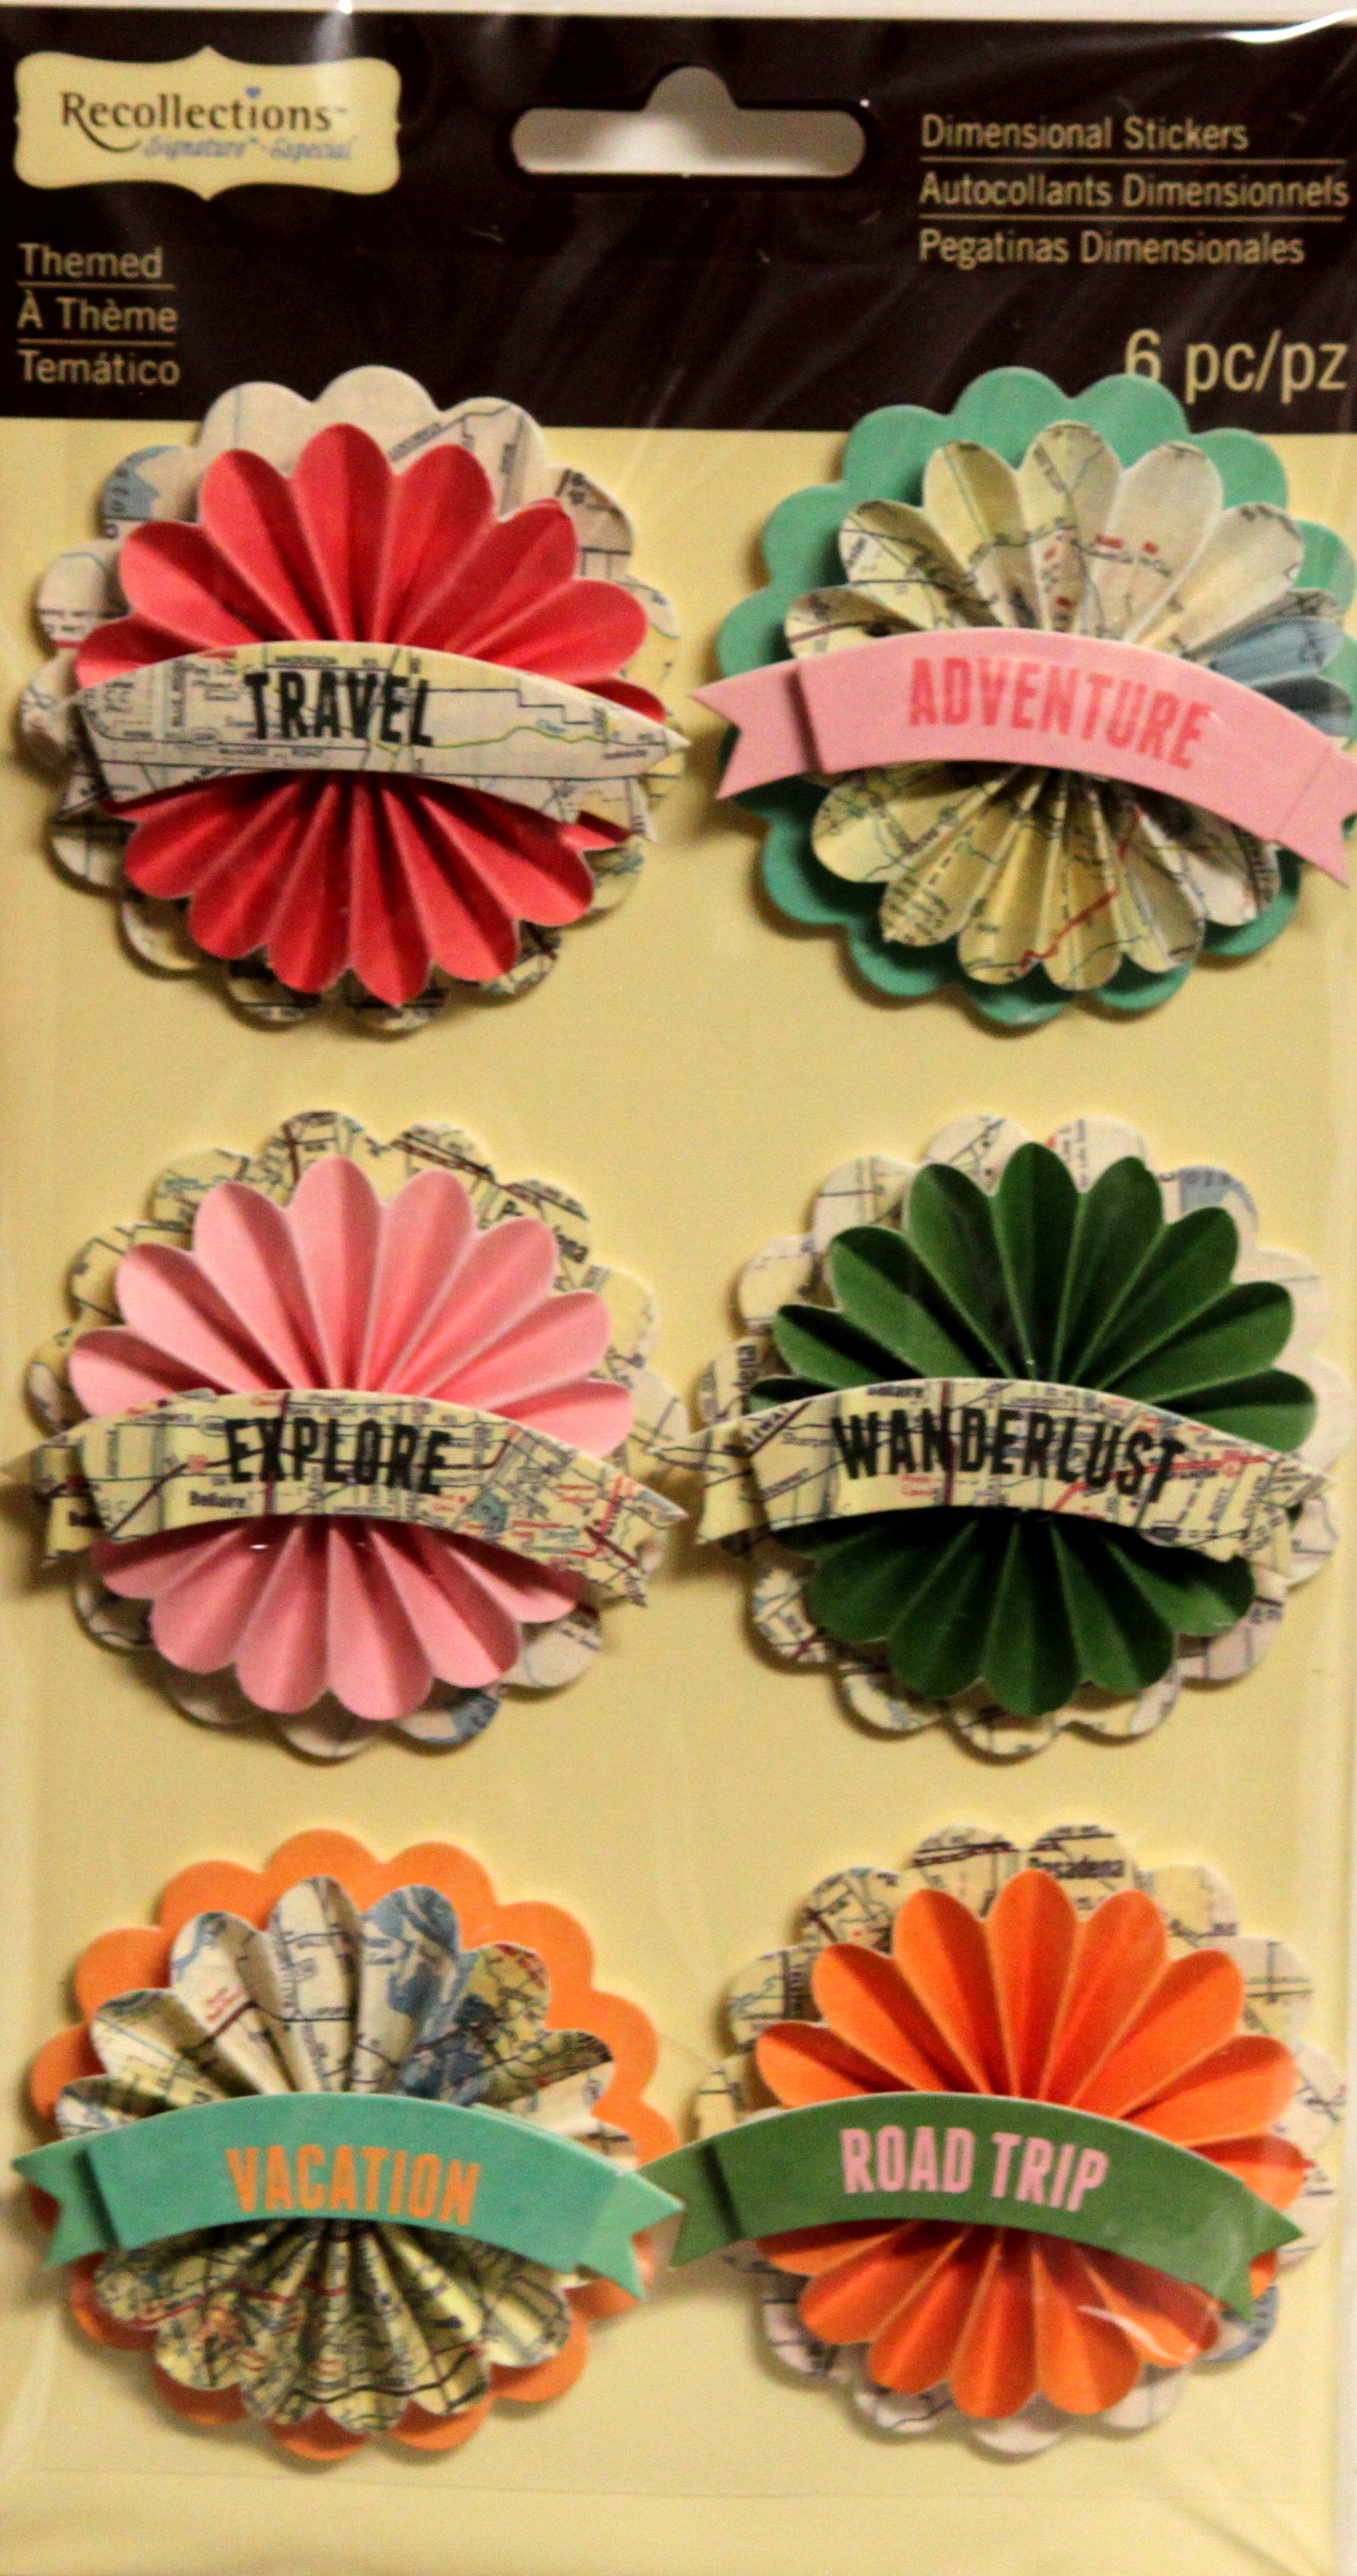 RECOLLECTIONS TRAVEL DIMENSIONAL FAN MEDALLION STICKERS